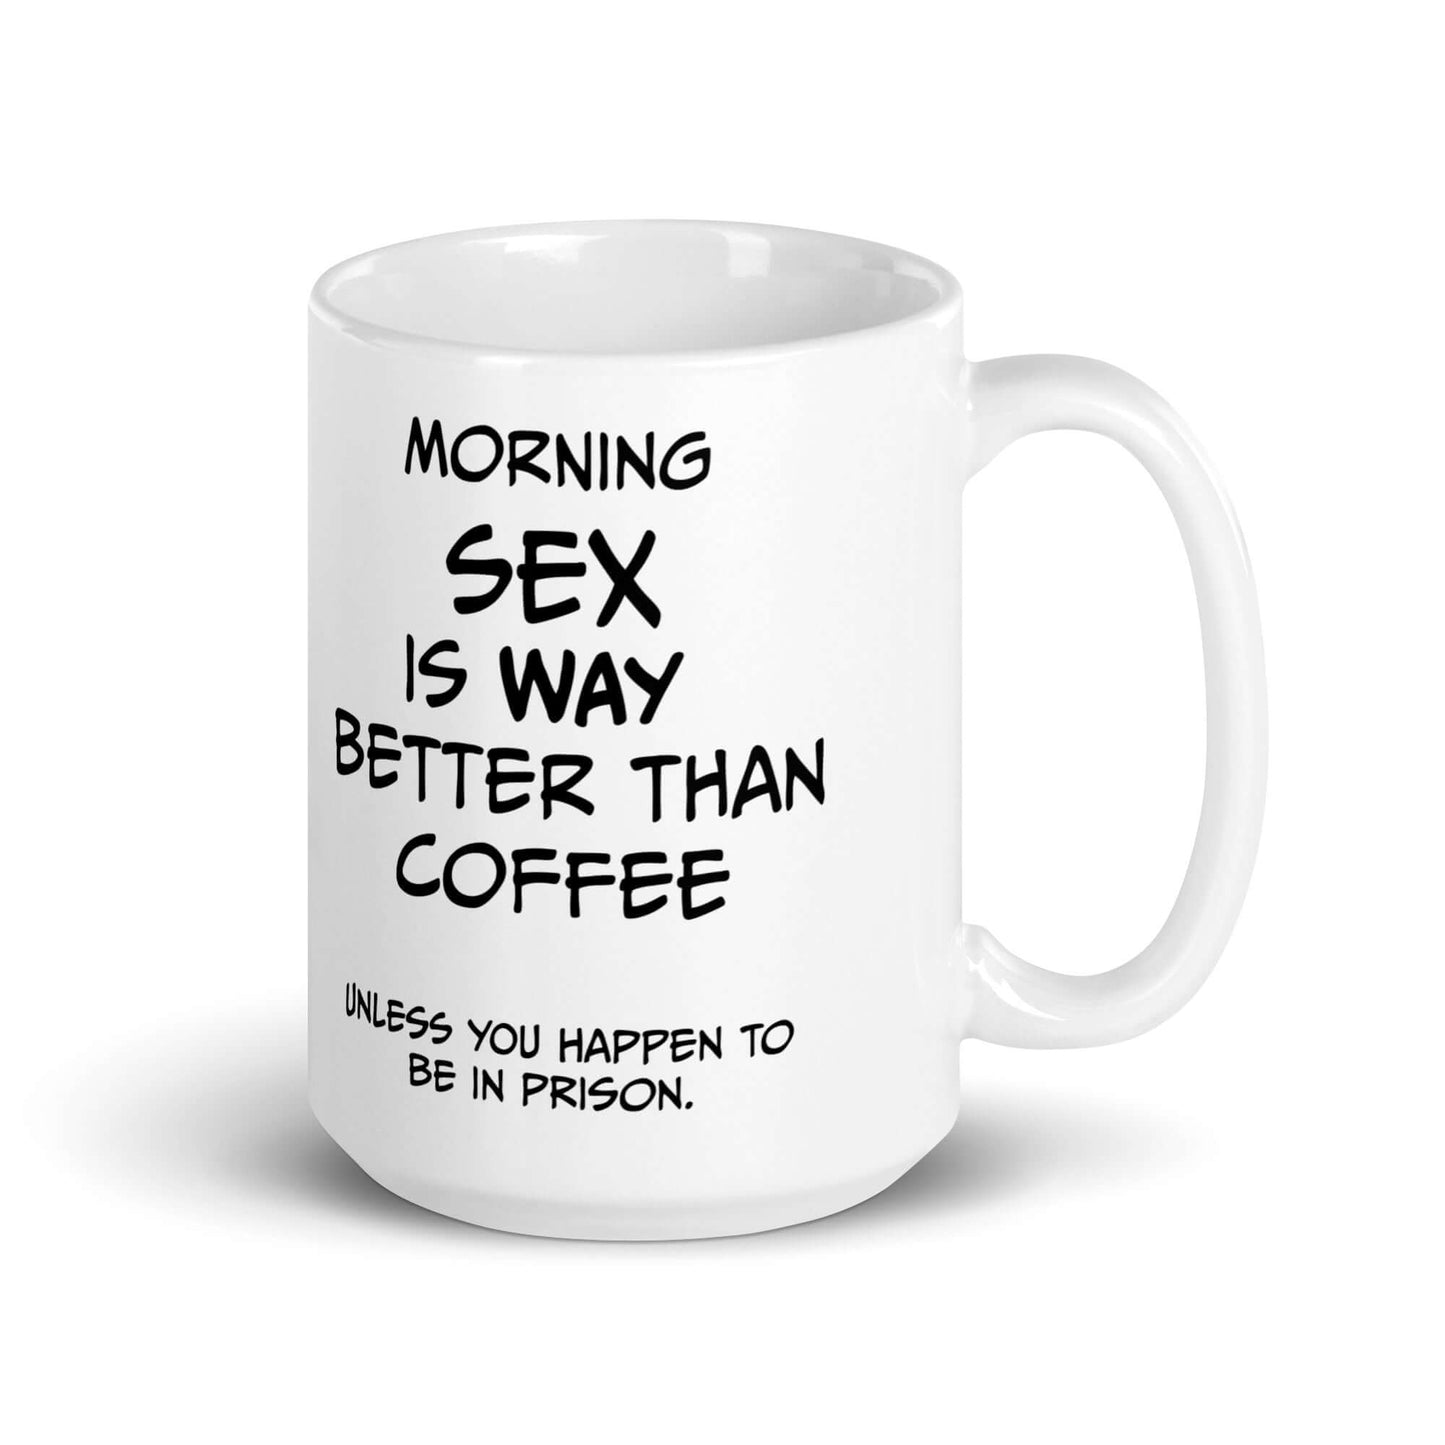 Morning SEX is WAY better than coffee.. Unless you happen to be in prison - White glossy mug - Horrible Designs